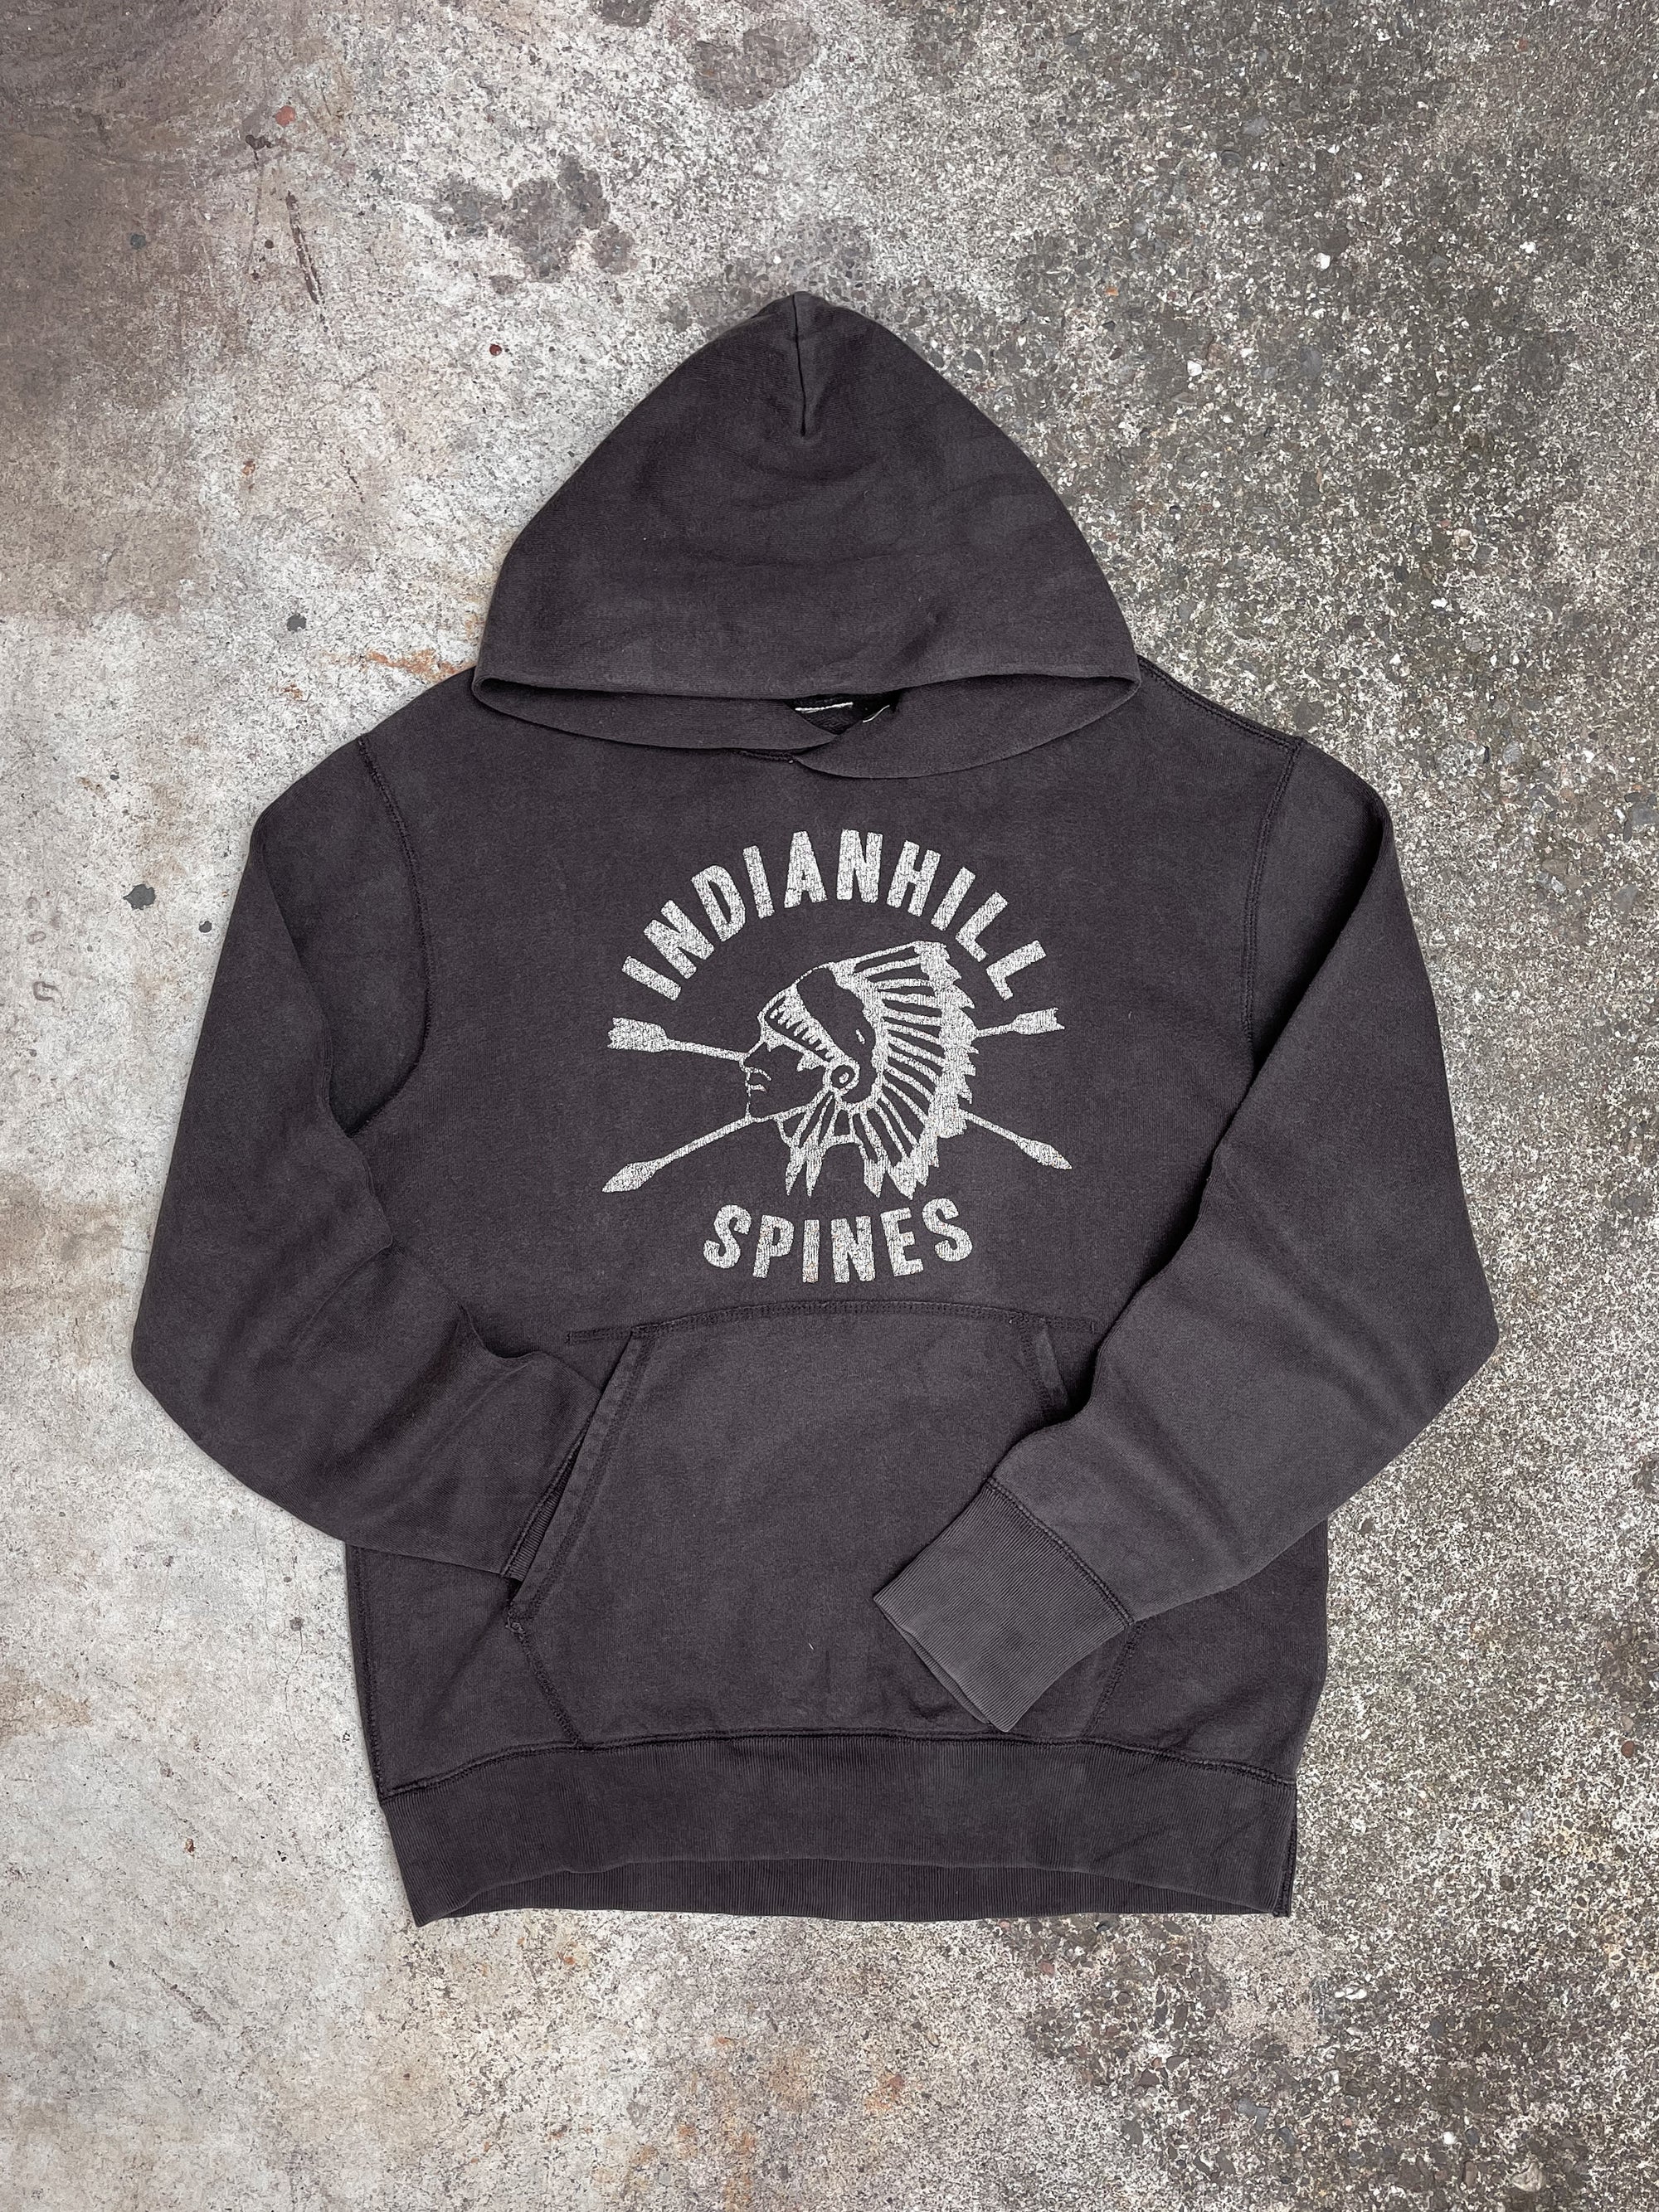 “Indian Hill Spines” Hoodie